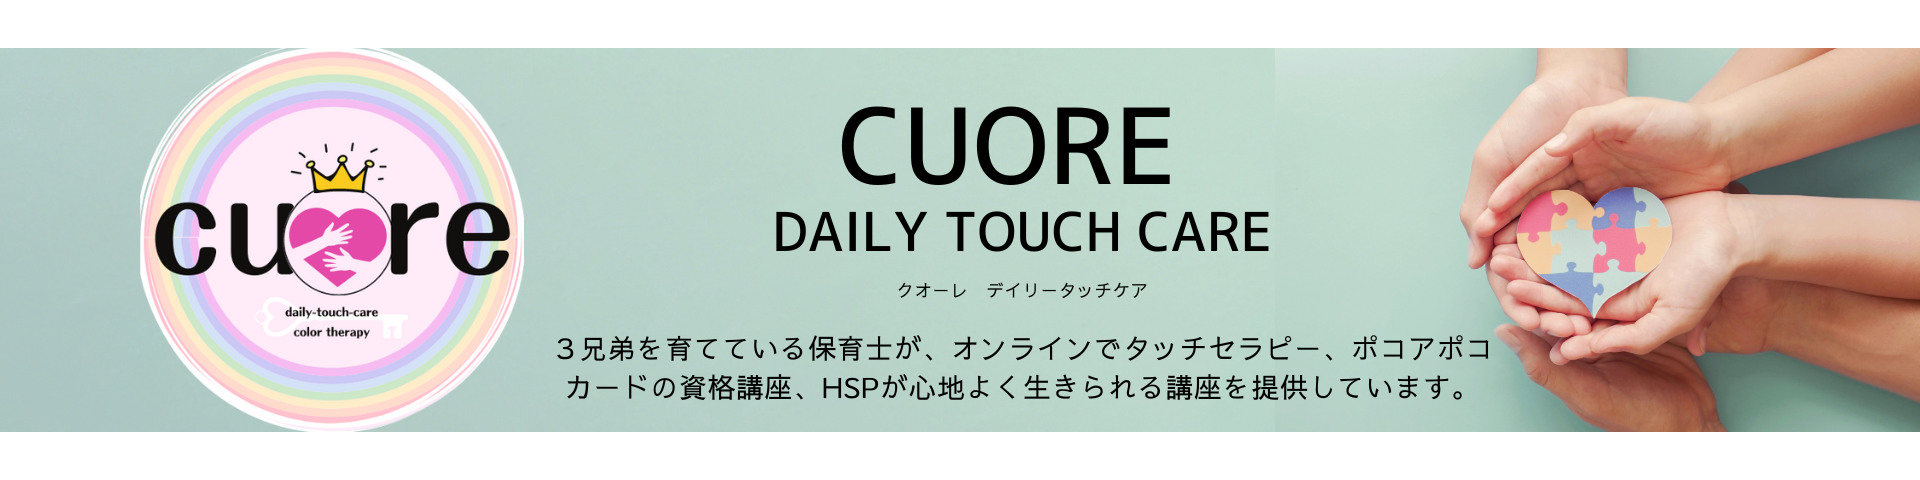 Cuore daily-touch-care 　